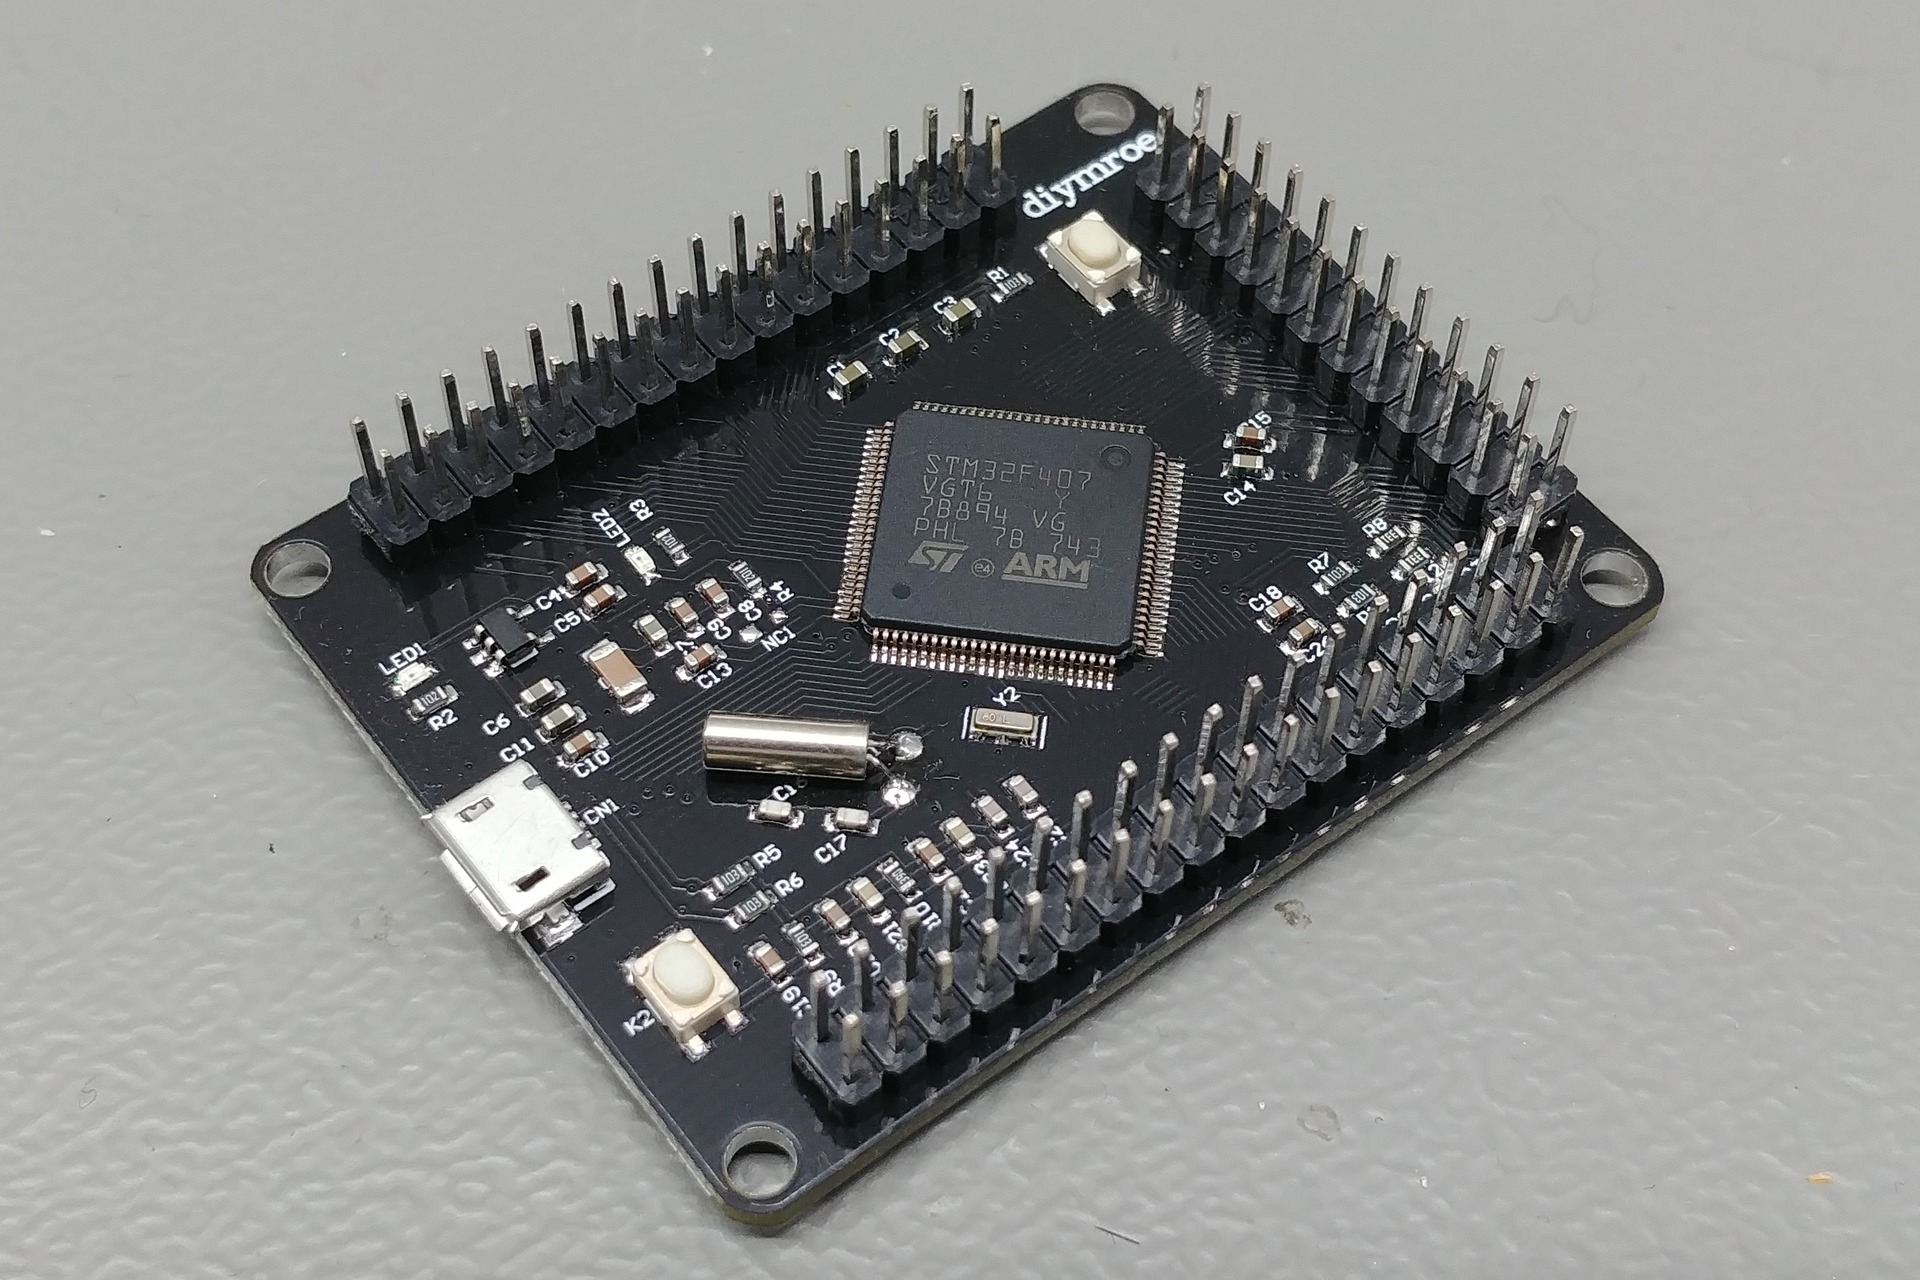 Diymore STM32F4: Perspective view